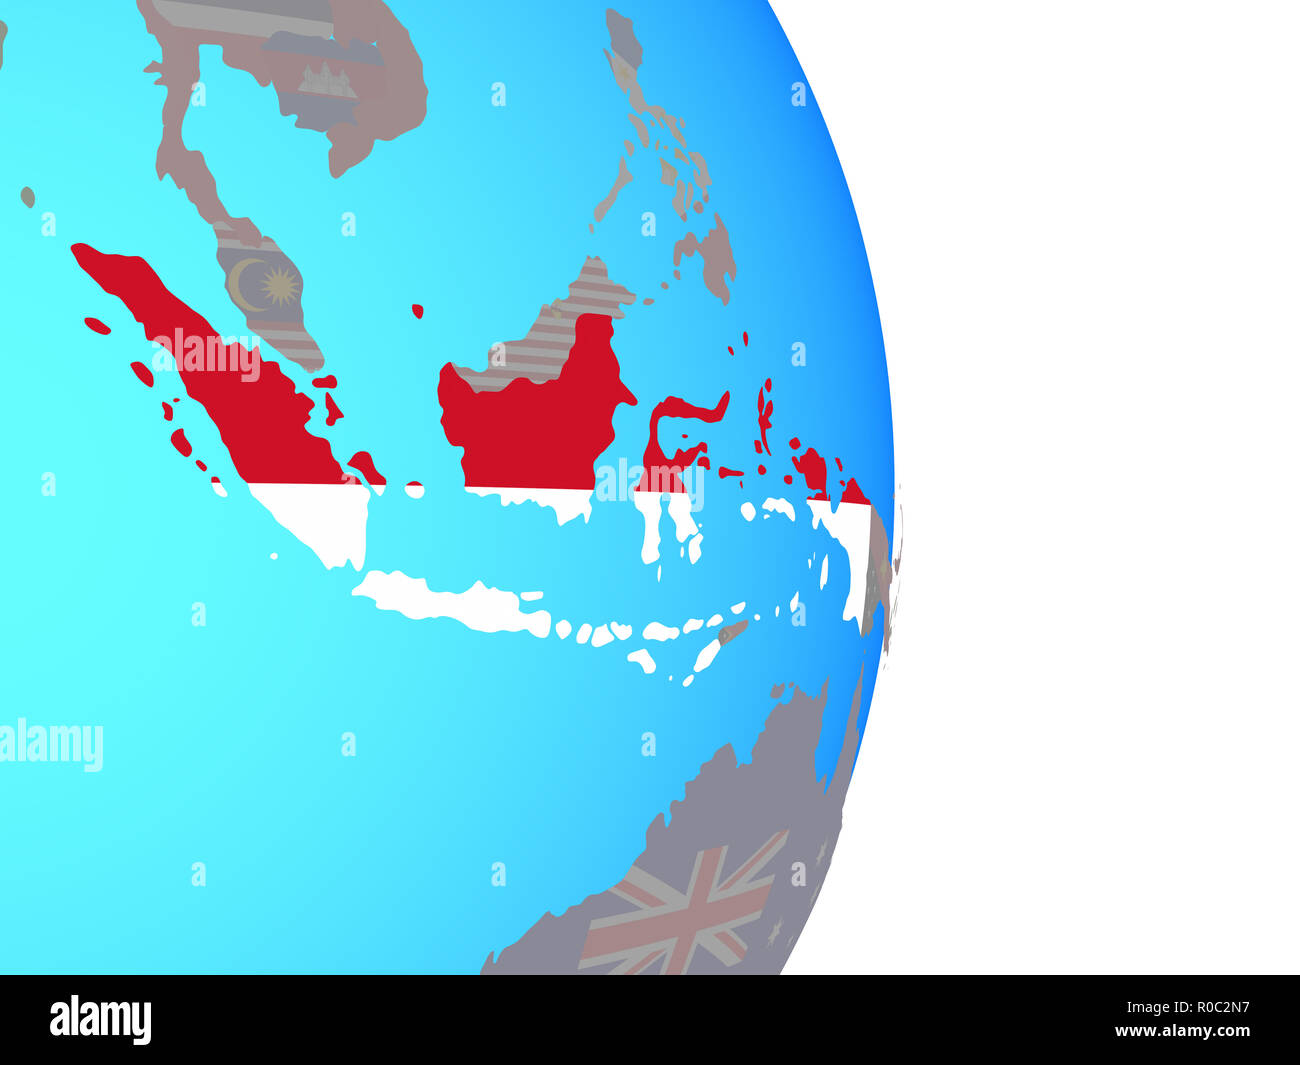 Indonesia with national flag on simple political globe. 3D illustration. Stock Photo